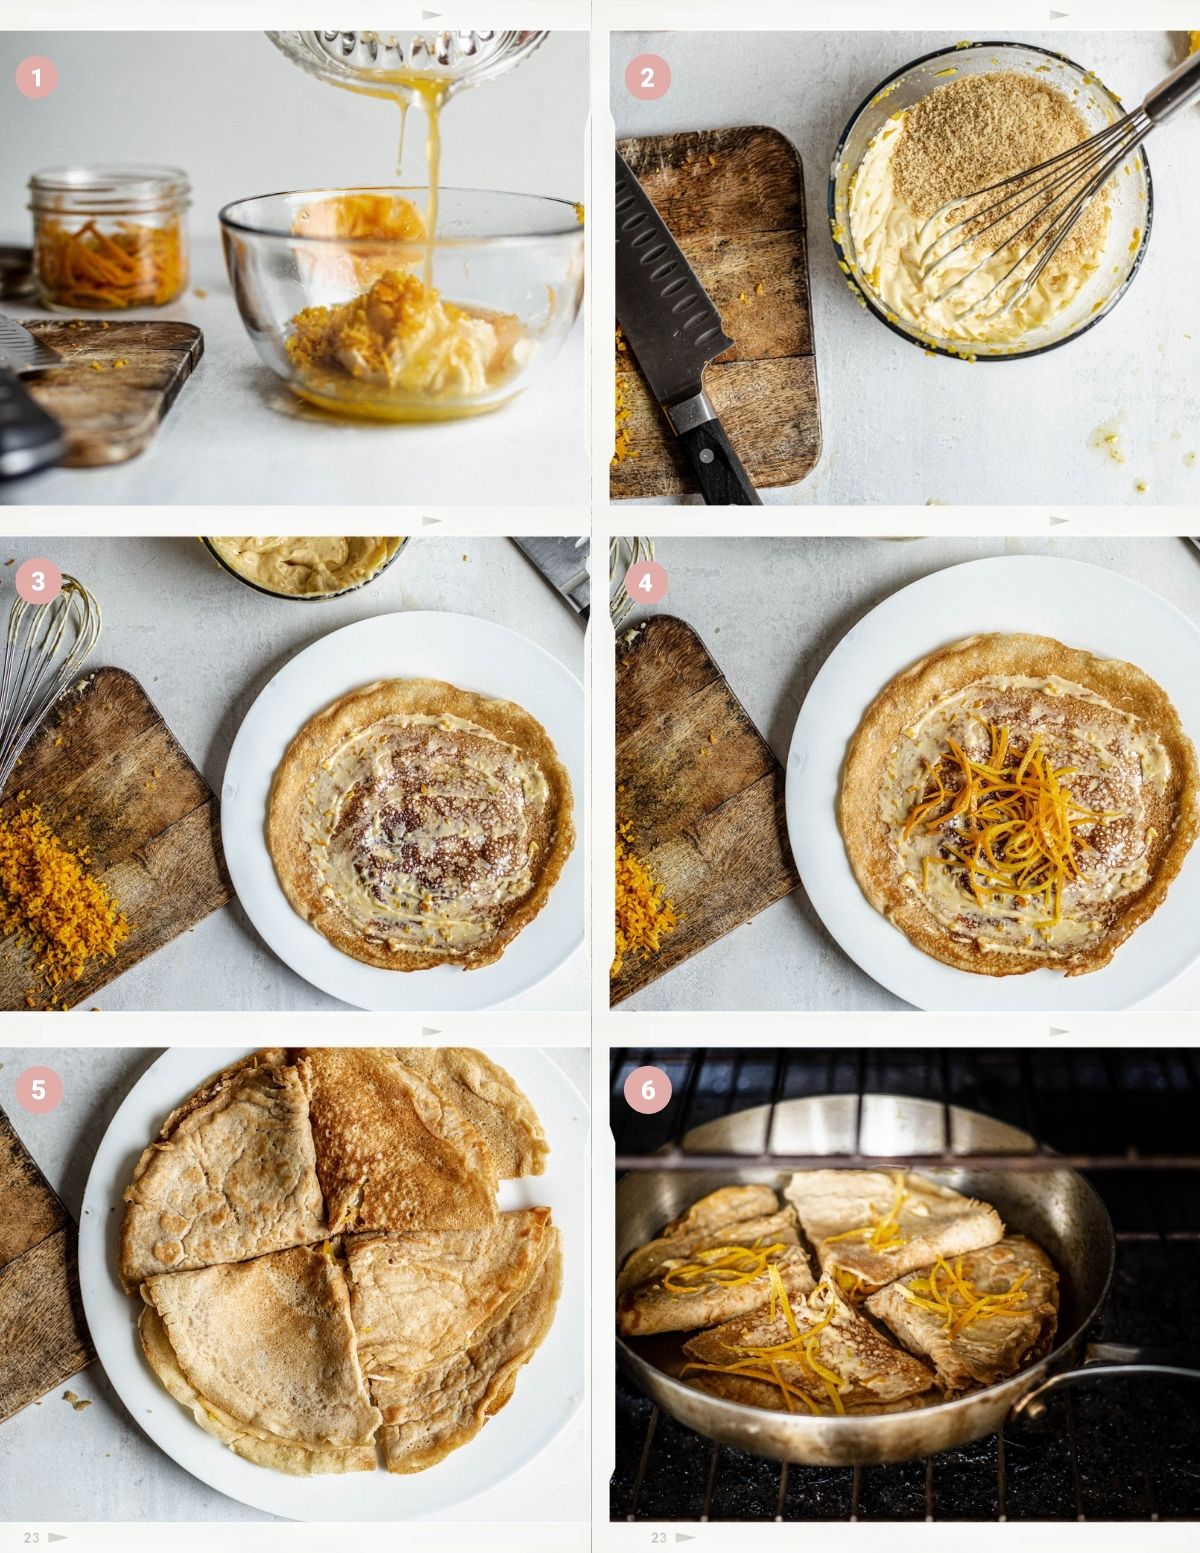 Montage showing a step by step process of finishing the Crêpes Suzette